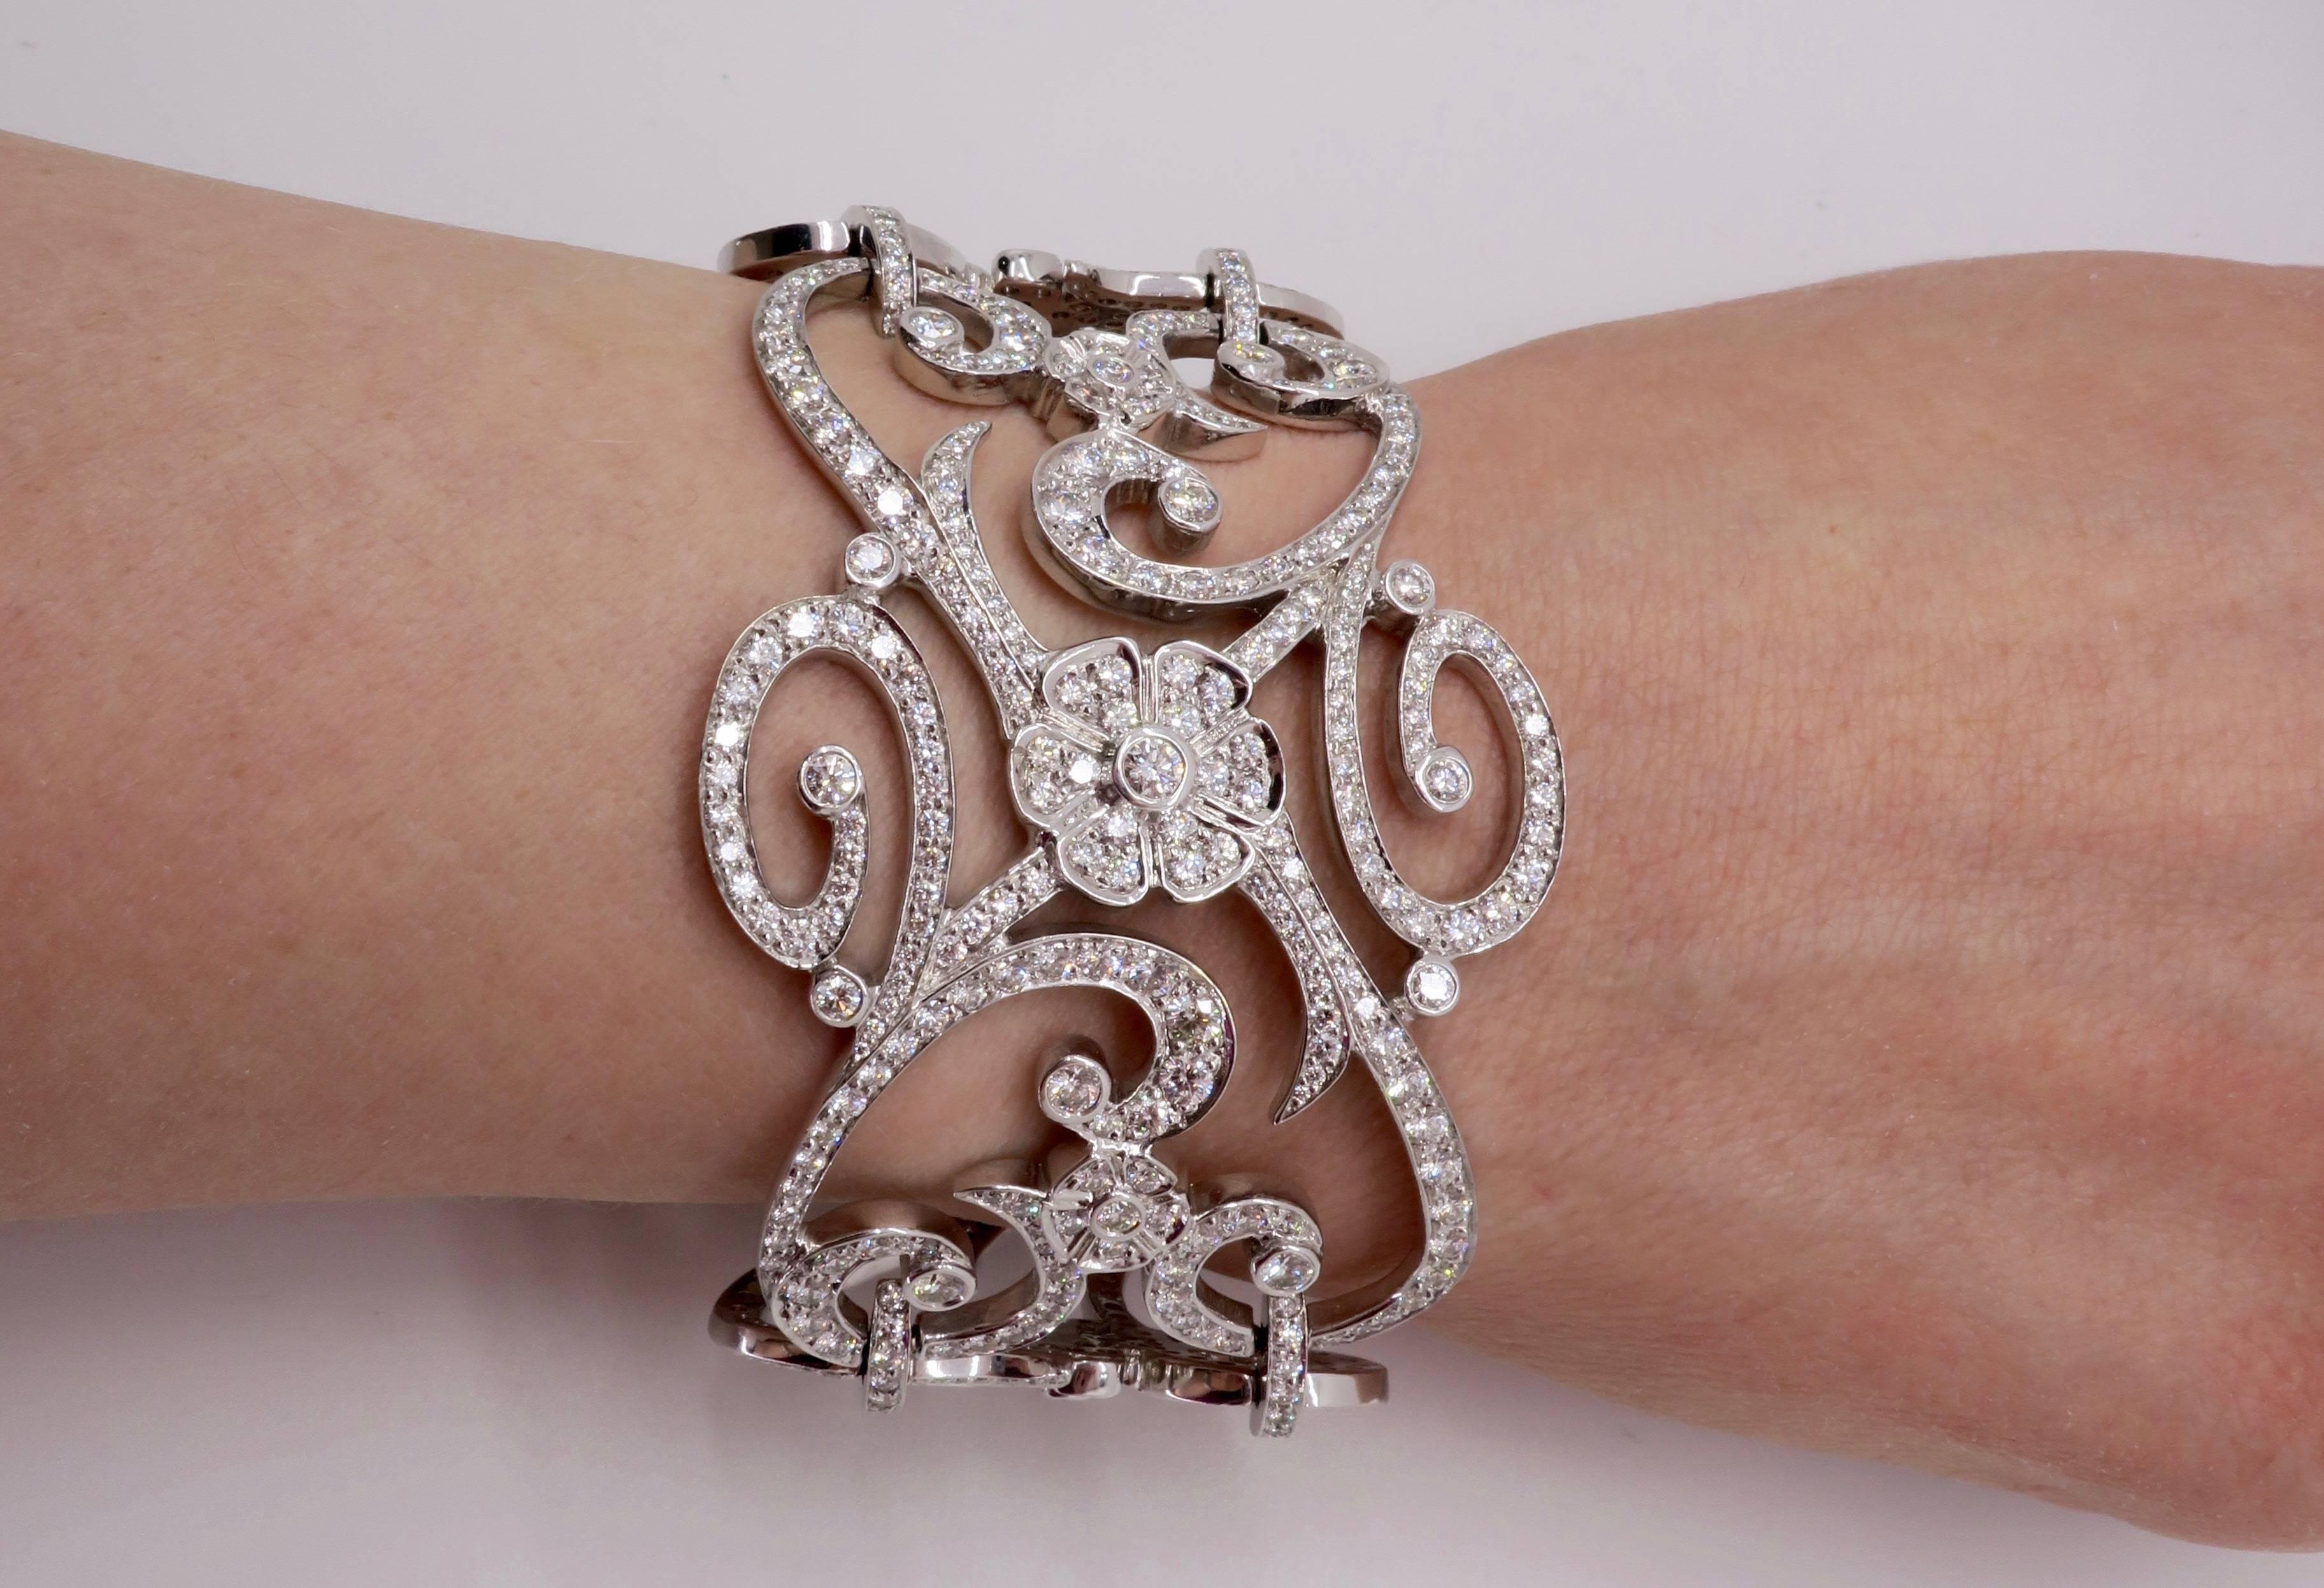 This jaw dropping Penny Preville bracelet features a stunning array of Round Brilliant Cut Diamonds. The diamonds have an average of F-I color and an average of VS to SI clarity. The total diamond weight is approximately 13.37CTW. The 18K white gold